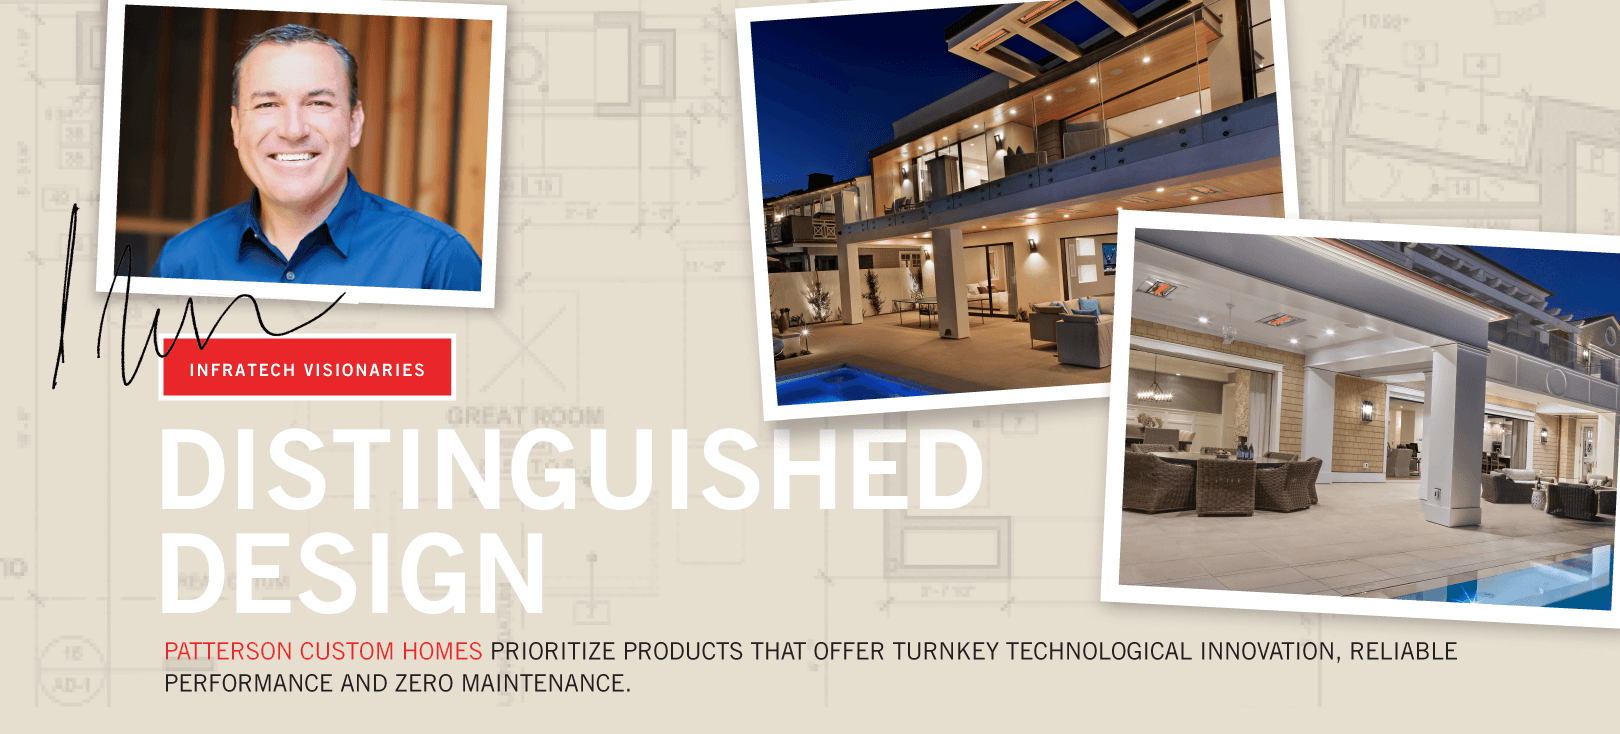 Patterson Custom Homes prioritize products that offer turkey technological innovation, reliable performance and zero maintenance.